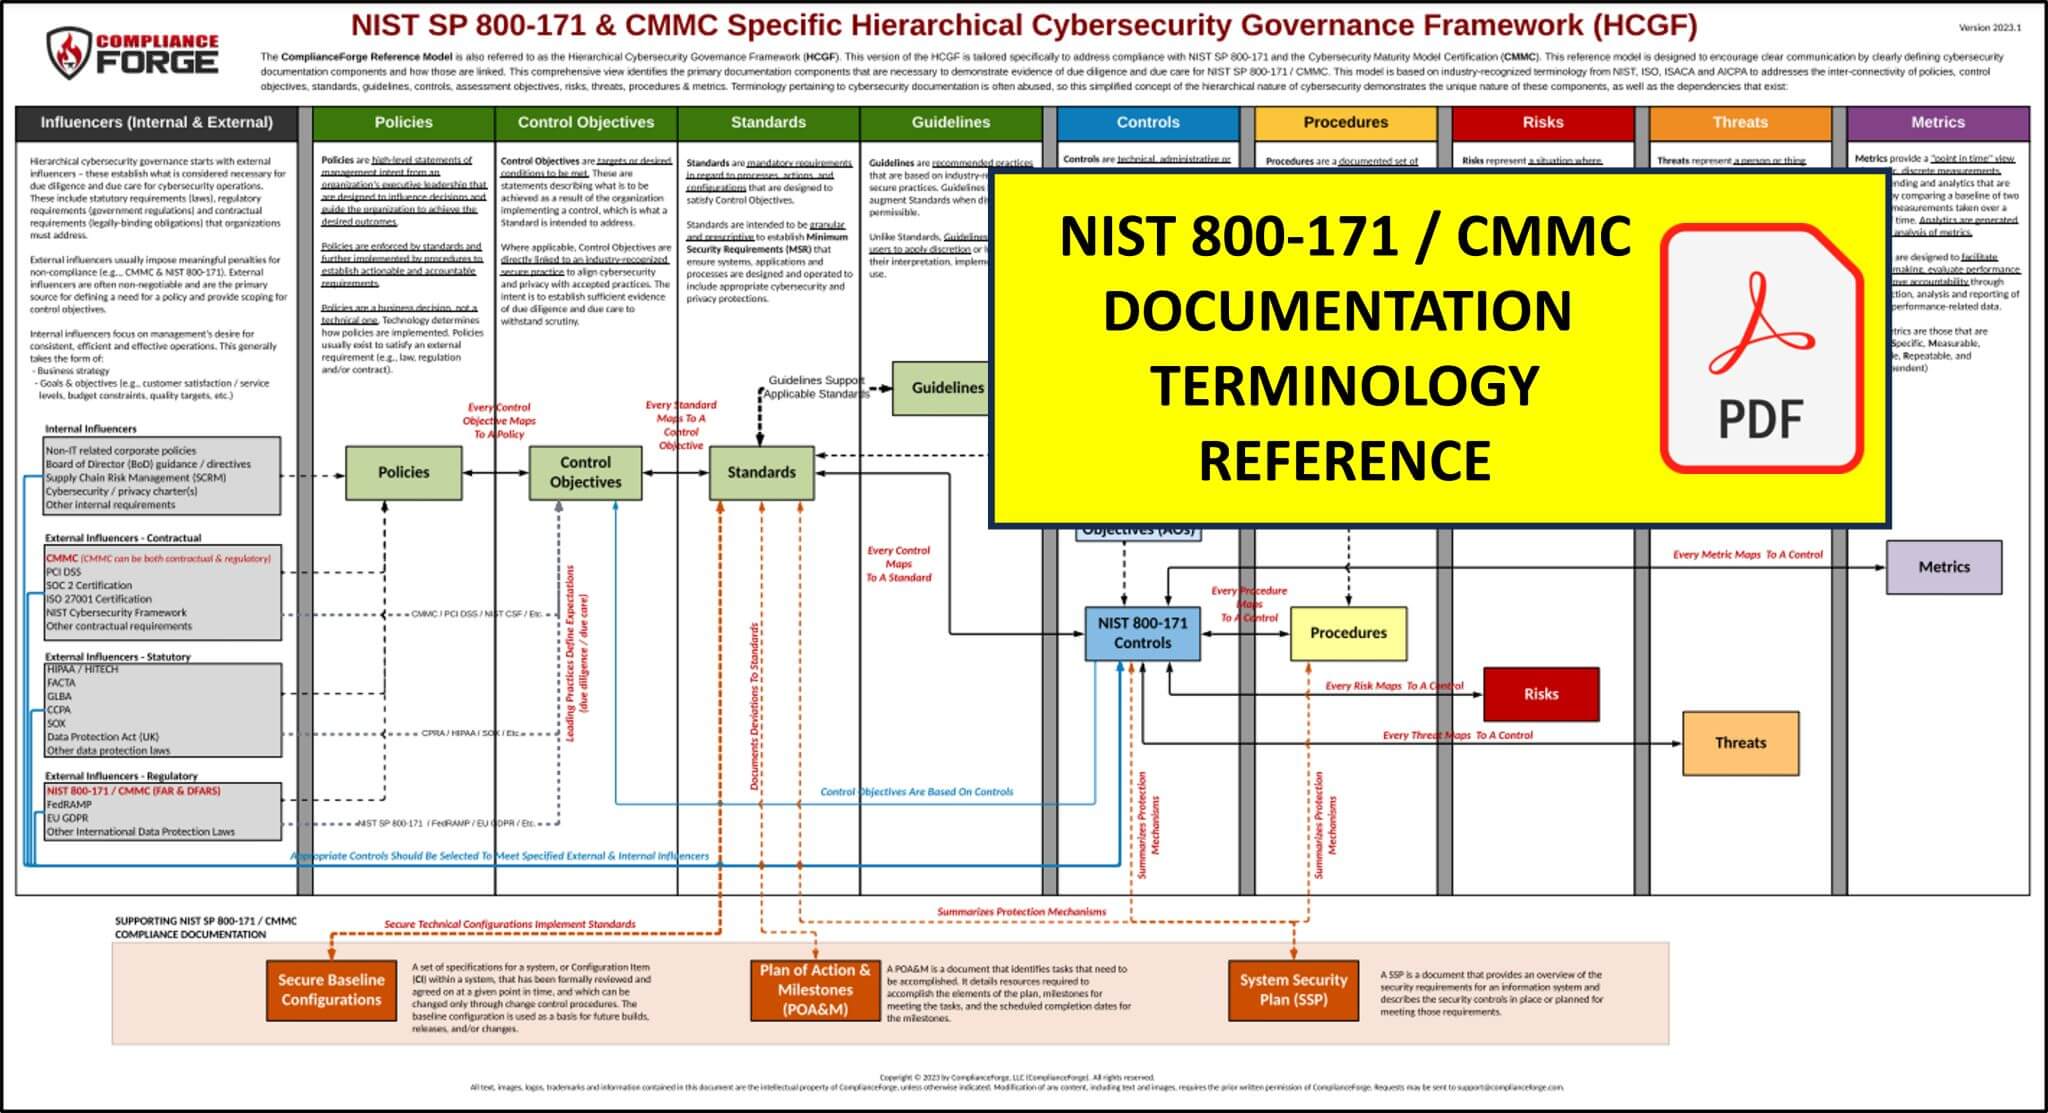 NIST 800-171 & CMMC compliance documentation terminology reference